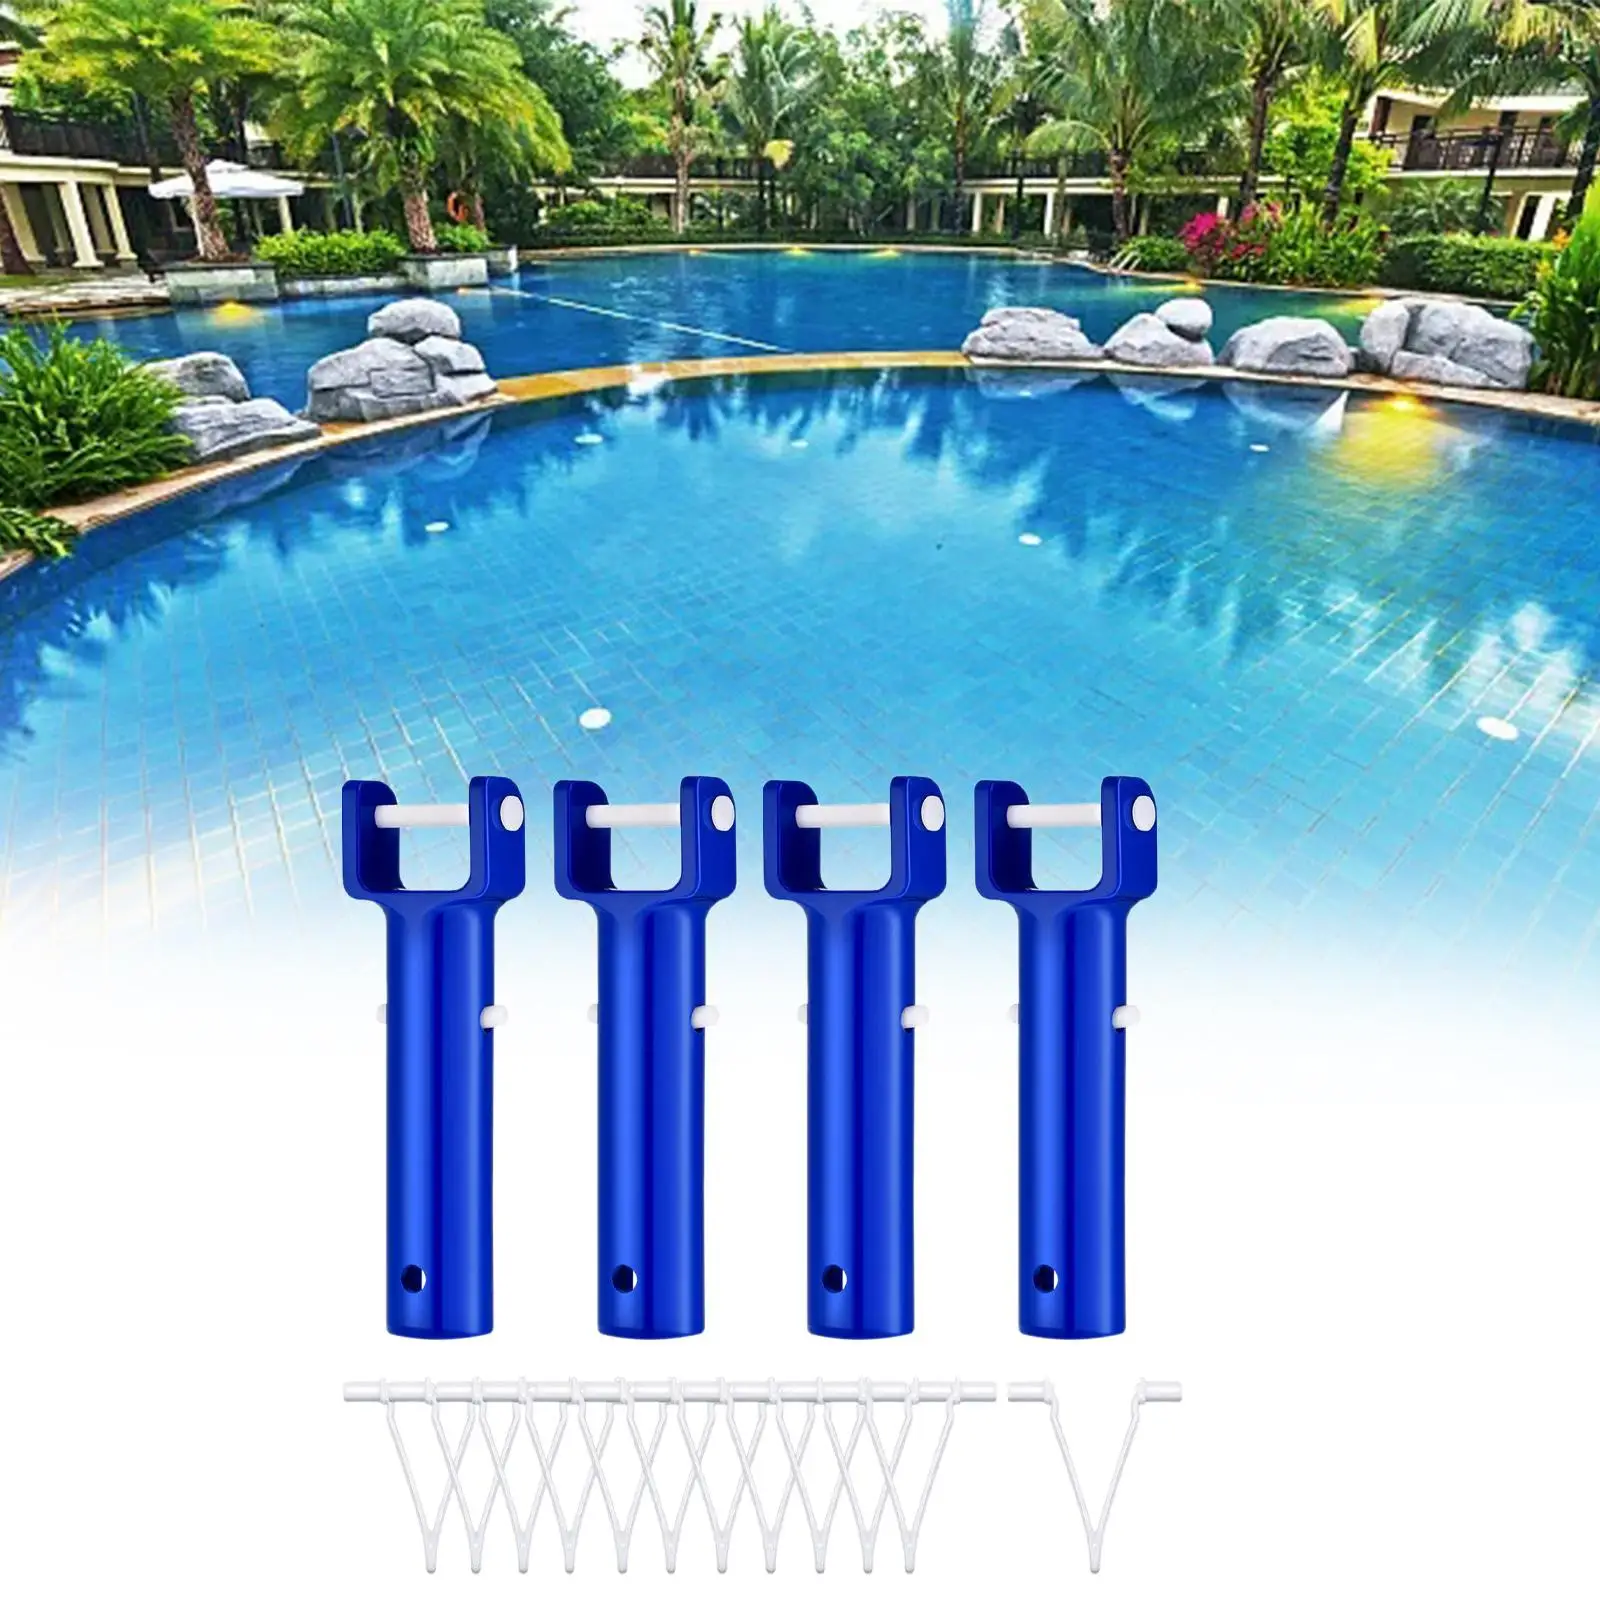 4 Pieces Replacements V Handle with 12Pcs V Clips Fitting Accessory for above Ground Pool Leaf Rakes Pool Vacuums Skimmer